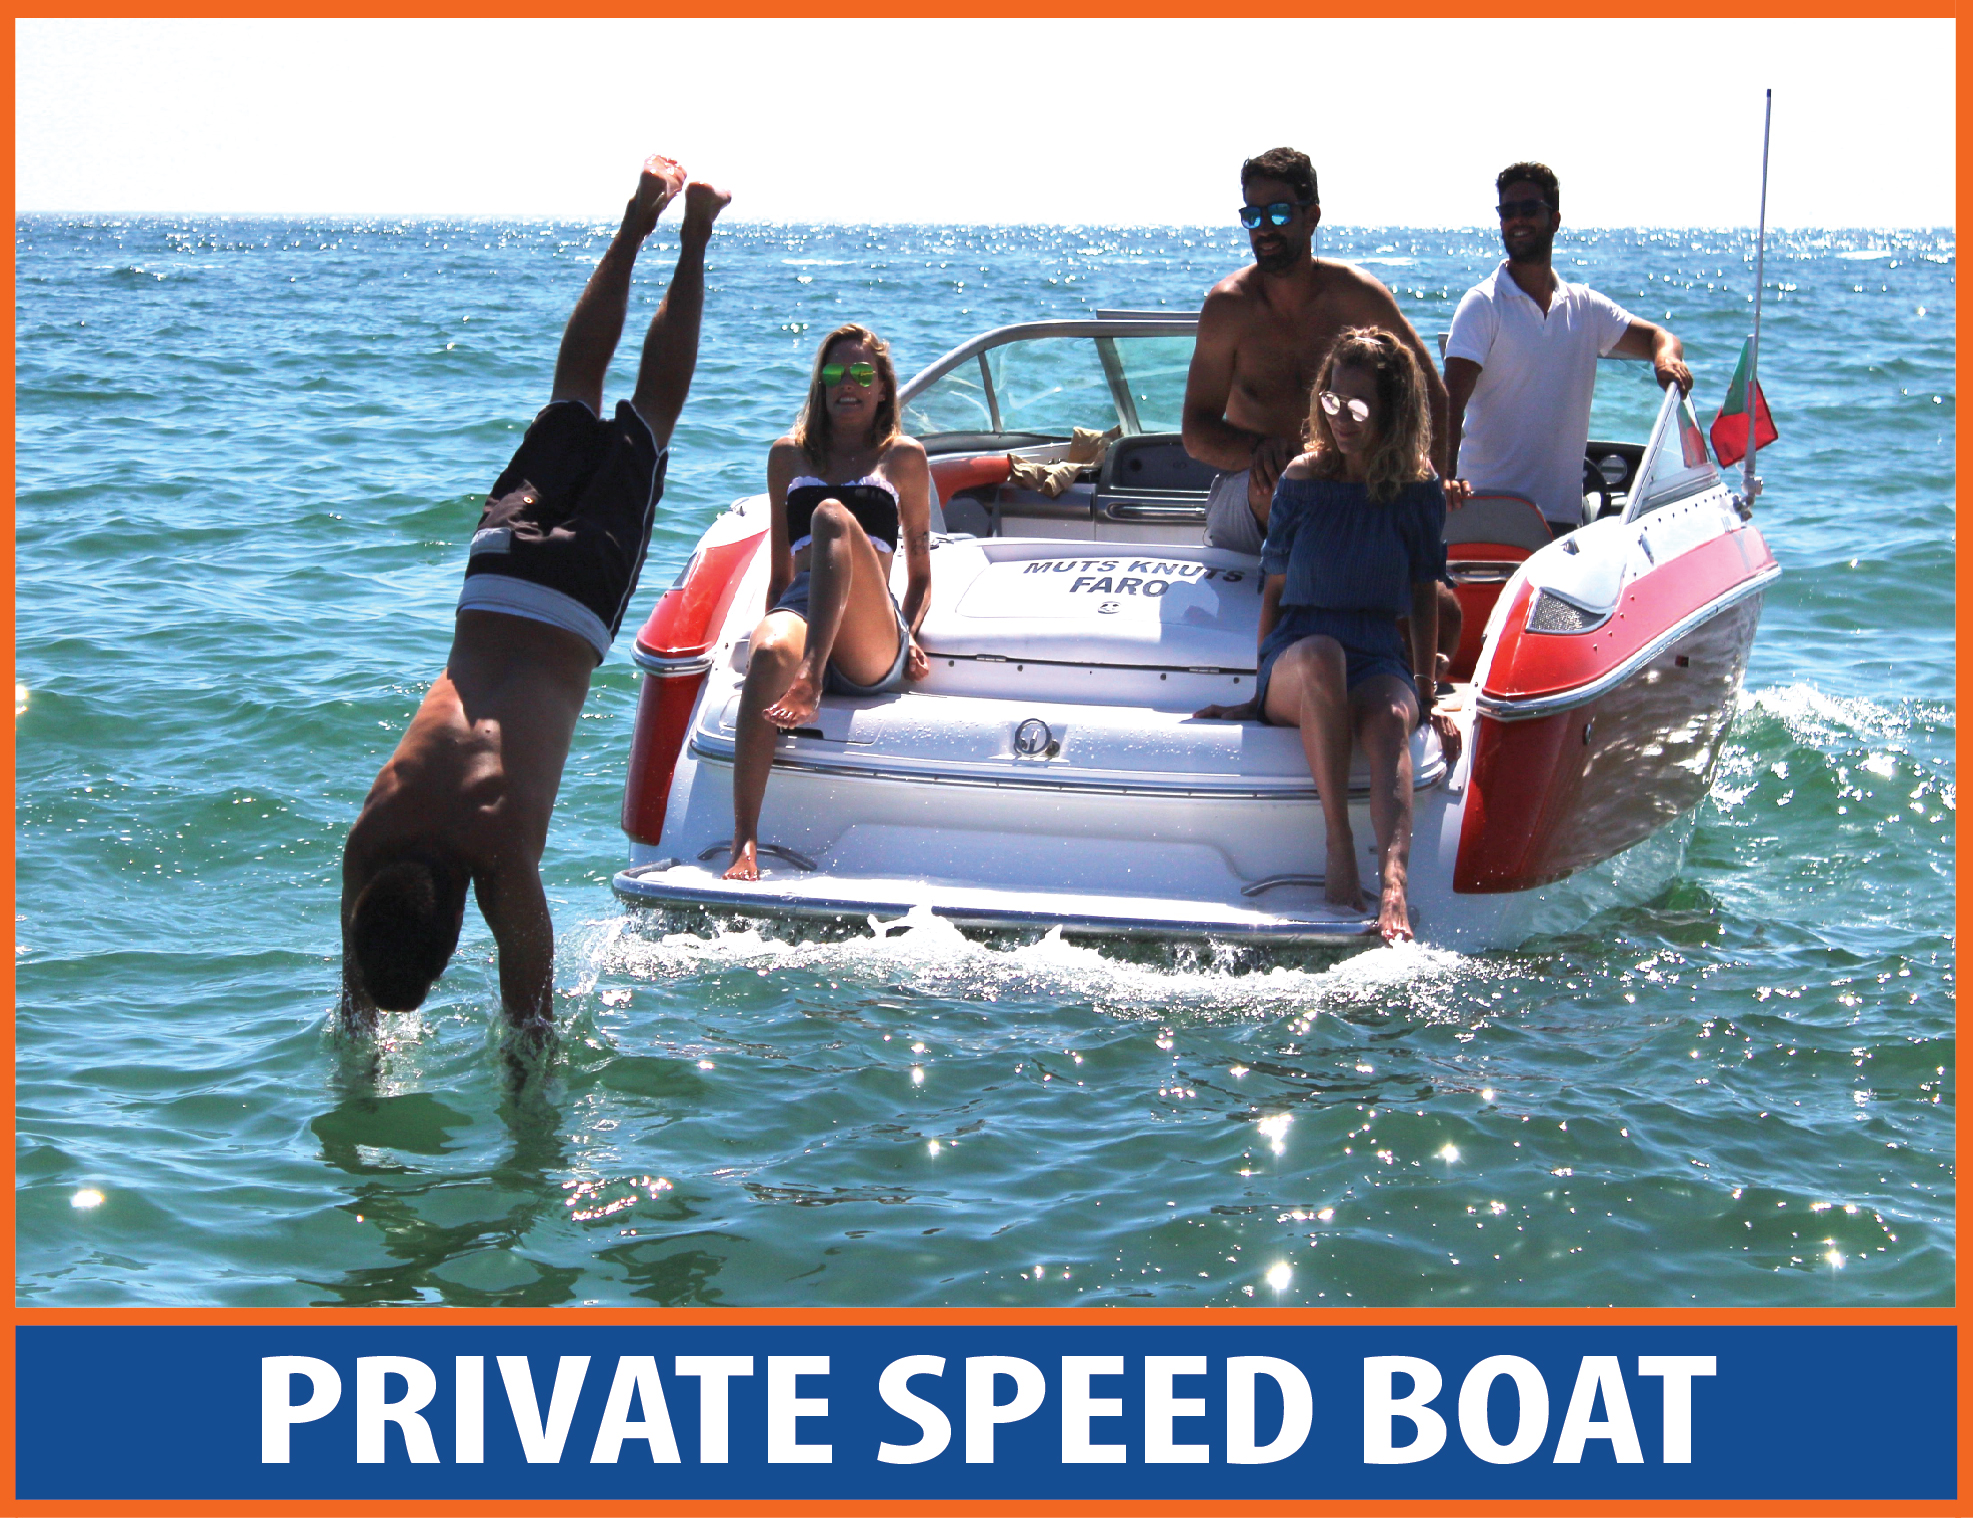 PRIVATE SPEED BOAT